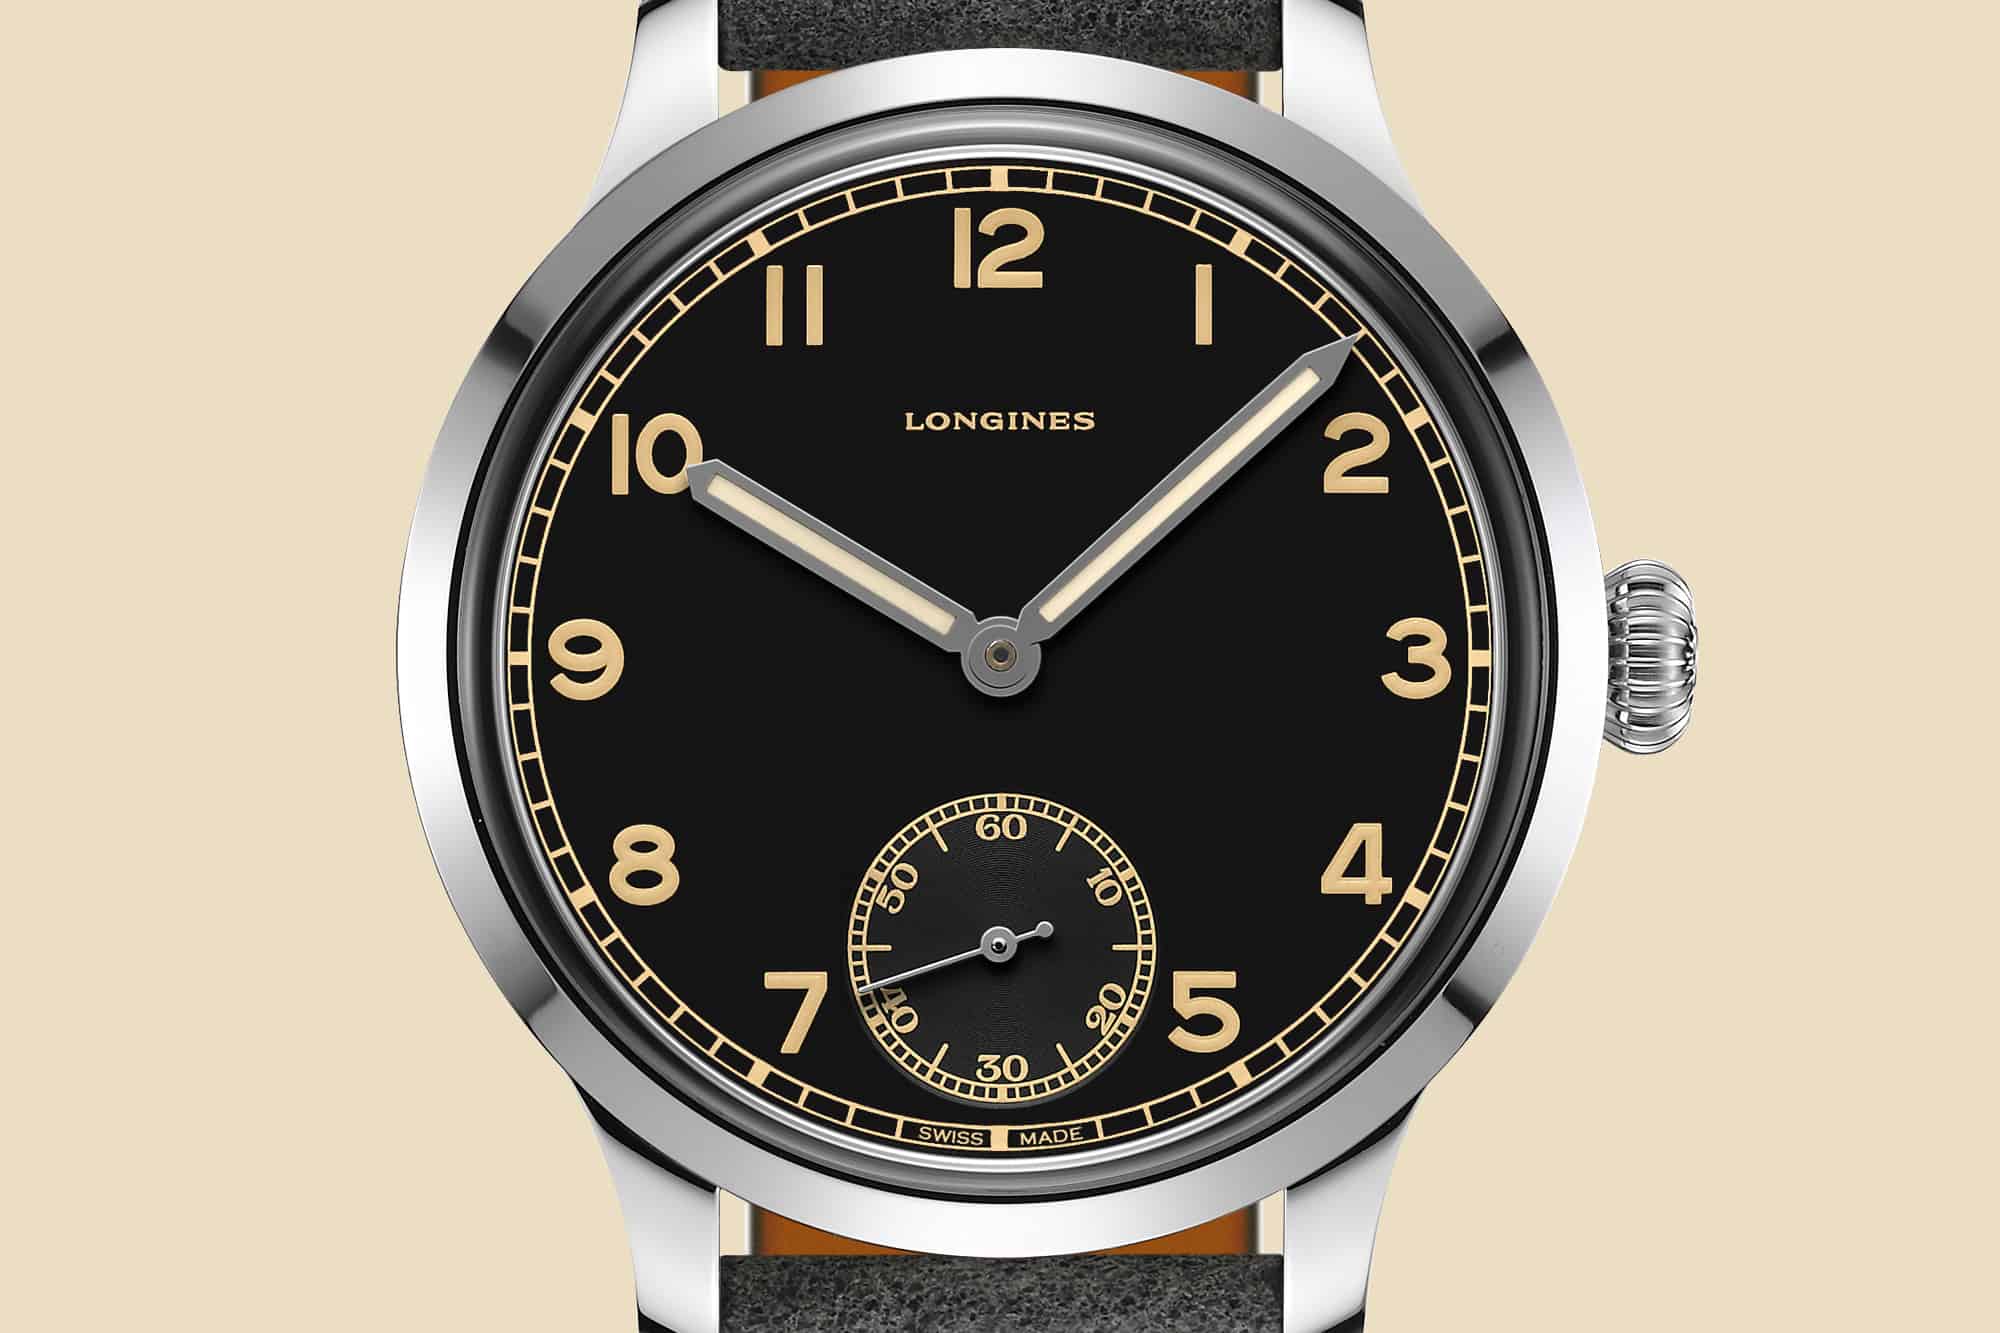 Introducing the Longines Heritage Military 1938